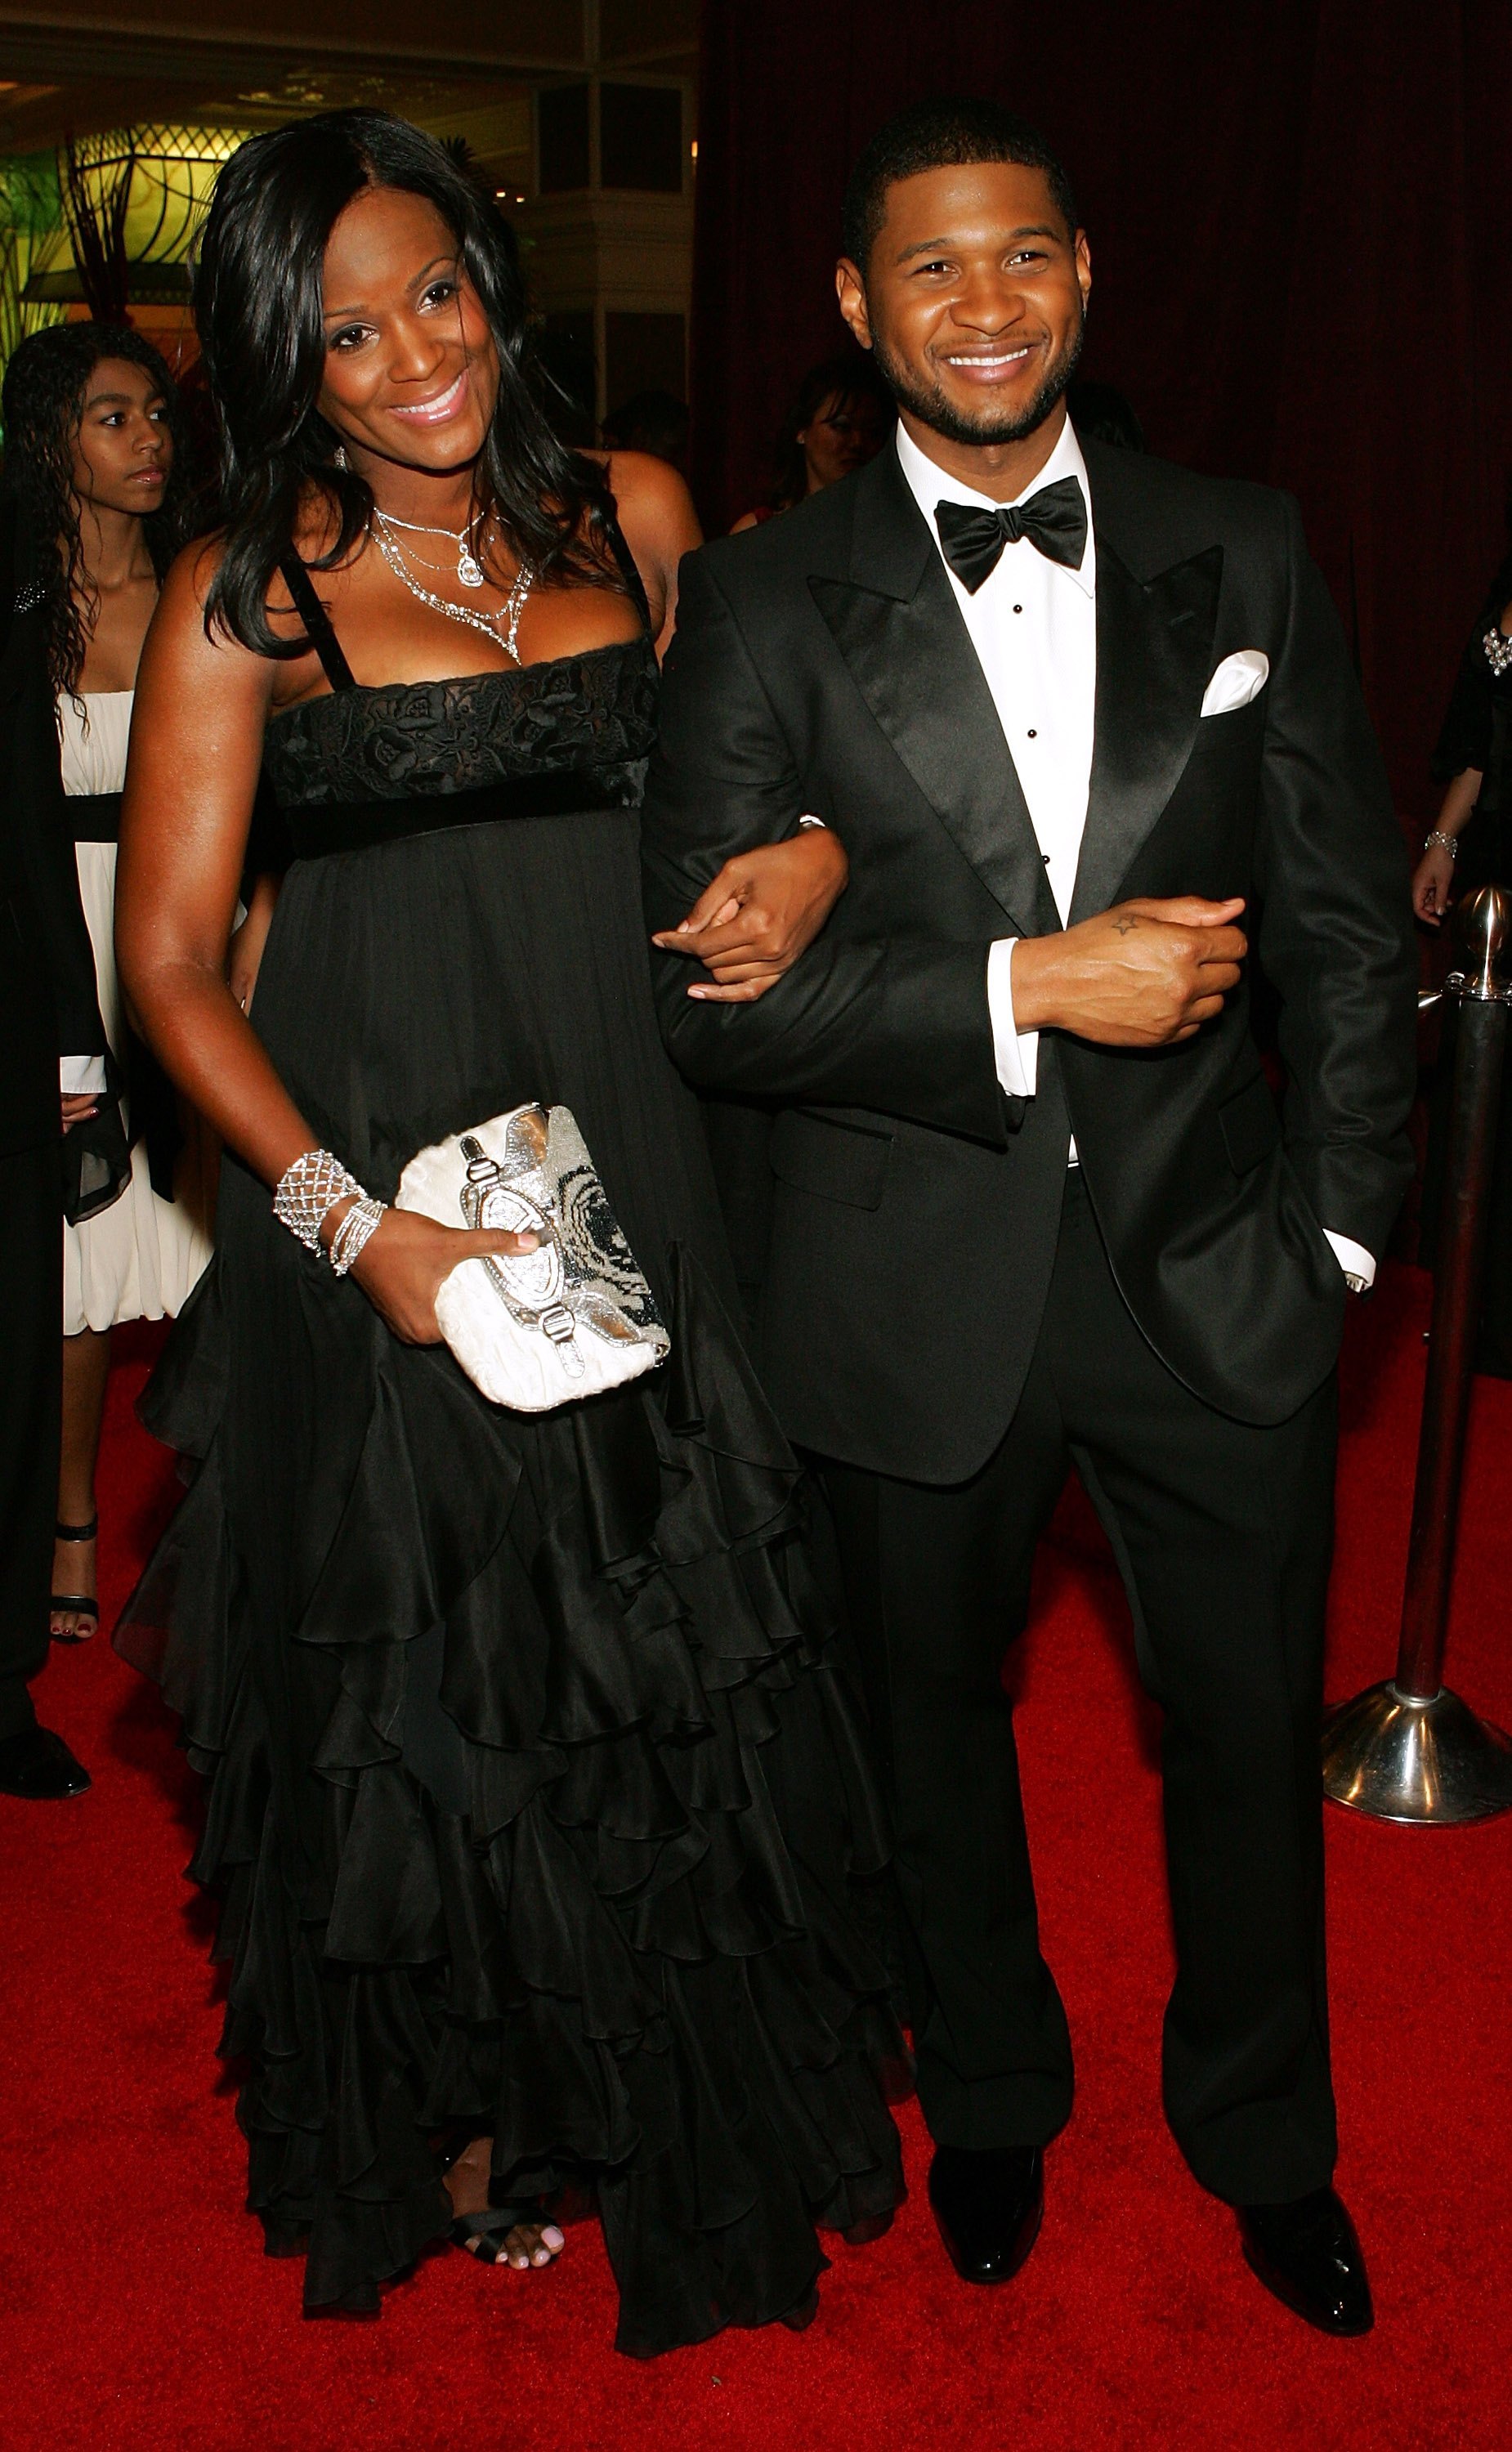 <p>In 2007, <a href="https://www.wonderwall.com/celebrity/profiles/overview/usher-747.article">Usher</a> married celebrity stylist Tameka Foster, who was pregnant with their first child at the time. The couple divorced two years later. Three years after that, during a 2012 interview with Oprah Winfrey, <a href="https://www.wonderwall.com/celebrity/profiles/overview/usher-747.article">Usher</a> admitted to cheating on Tameka with her own bridesmaid. "Towards the end of our marriage, I found myself lost and I just wanted out," he said. "I was faithful at heart, but not faithful all the way. Even having a conversation with another woman about ... your relationship is not being faithful." Tameka then told "Entertainment Tonight" that her ex "admitted to sleeping with one of the two" bridesmaids. "It was a very disappointing revelation," she said. "I had suspected for some time. You have to understand, this is like family to us. This is someone who was there when my children were born. She took me to the hospital when I was in labor with one of them. I hate to say it but I somewhat empathize with her because I feel that she was vulnerable and she fell into somewhat of a trap. I think that she got very close to him as a result of being my friend and I feel as though he used it to his advantage. I mean, clearly." It wasn't the first time <a href="https://www.wonderwall.com/celebrity/profiles/overview/usher-747.article">Usher</a> was at the center of a cheating scandal: In 2003, he and TLC member Chilli called it quits after he reportedly cheated on her -- which inspired his 2004 album "Confessions."</p>